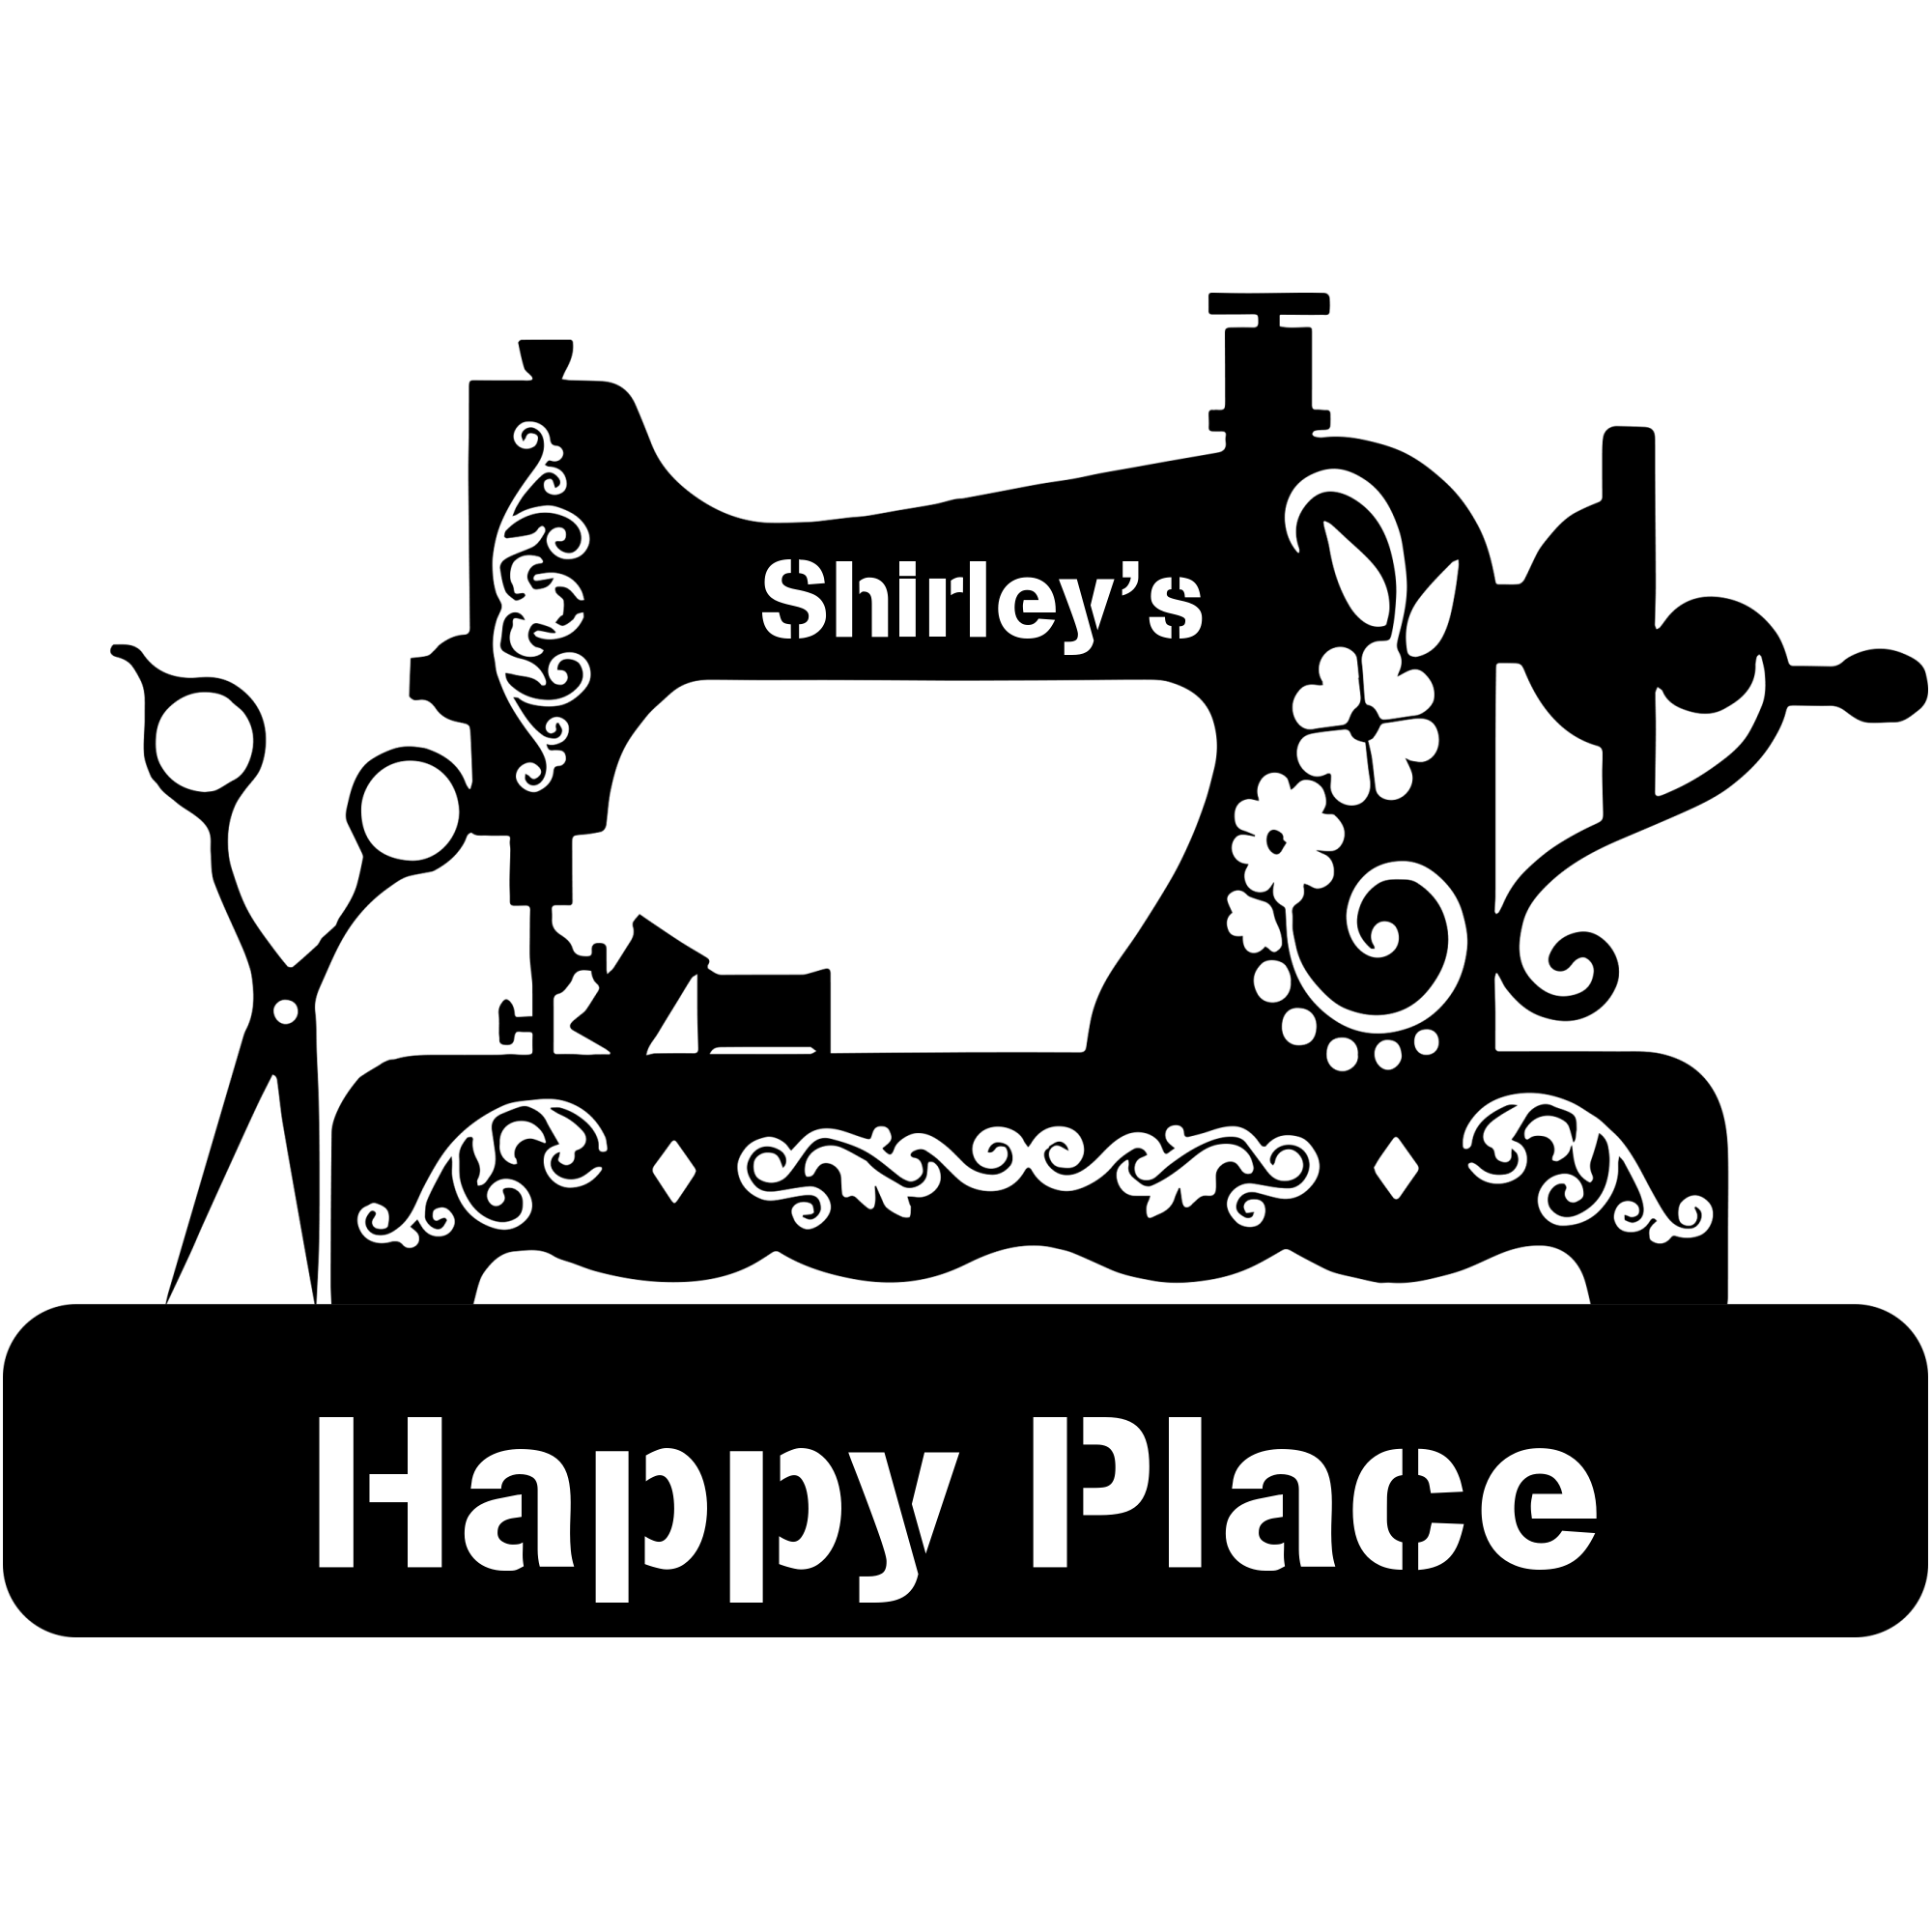 Personalized Sewing Machine Happy Place Metal Sign Art, Cut Metal Sign, Metal Wall Art, Metal House Sign, Metal Laser Cut Metal Signs Custom Gift Ideas 12x12IN